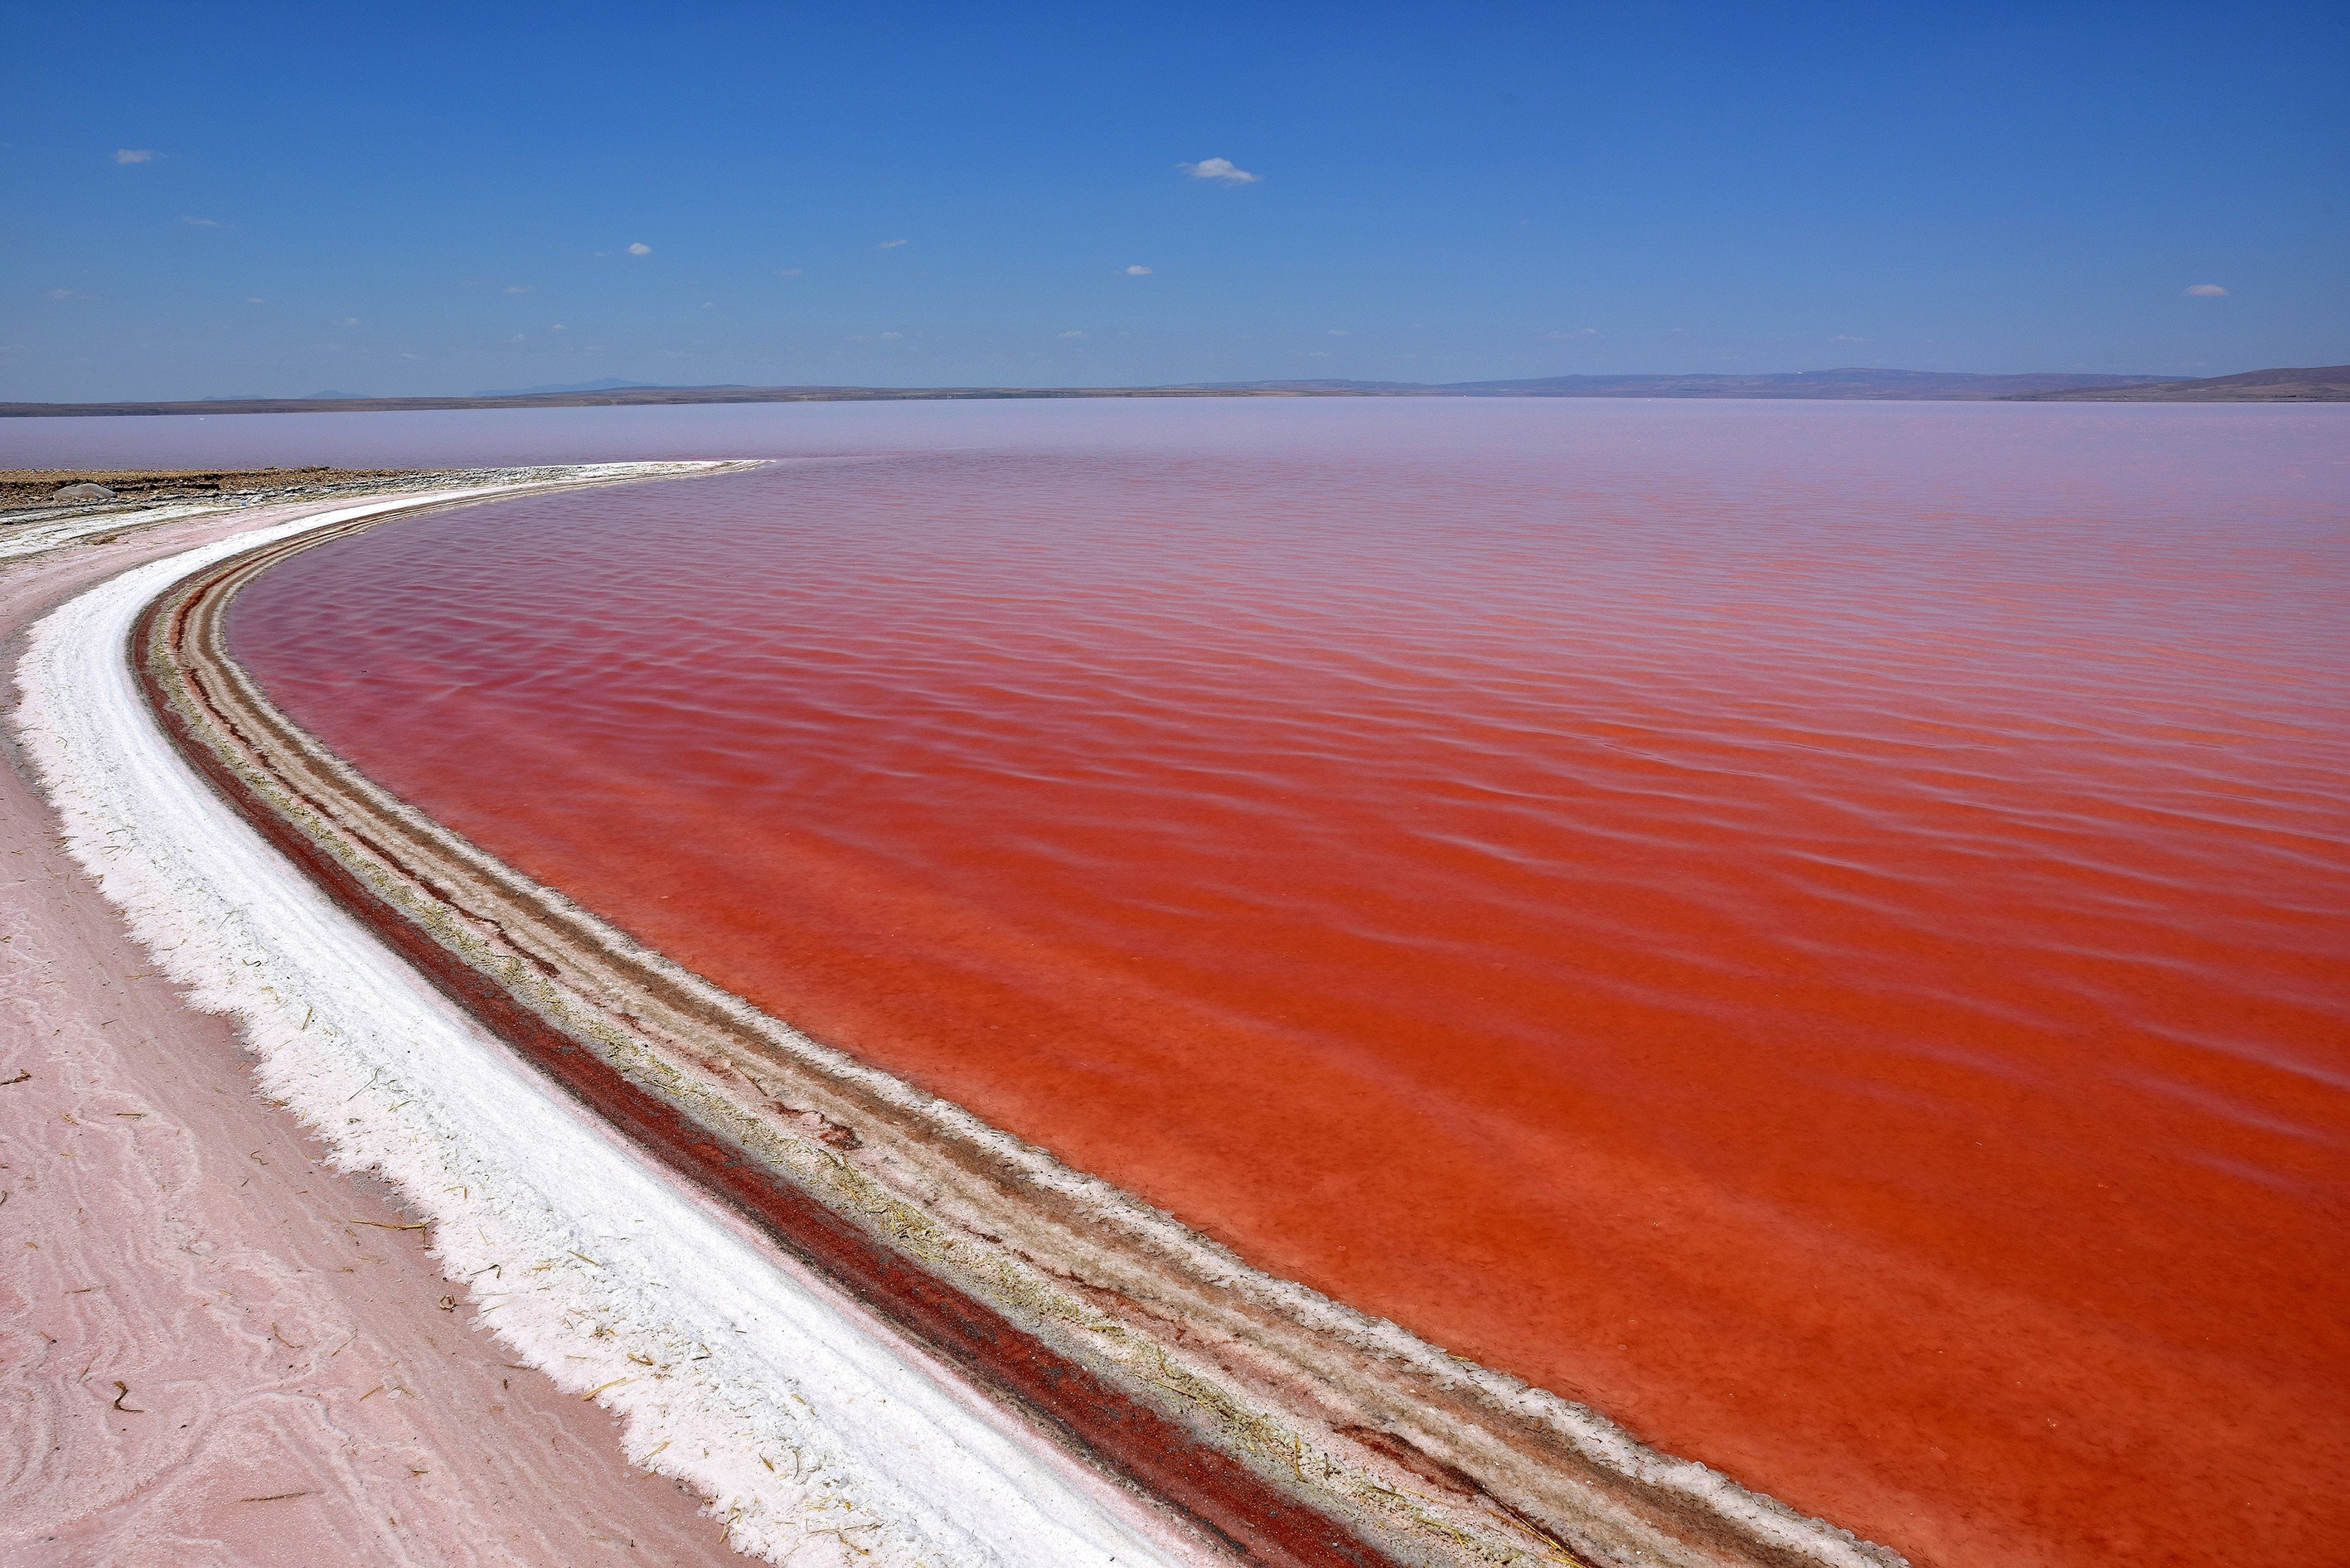 A view from the  Salt Lake  in Aksaray, Turkey on July 16, 2015.